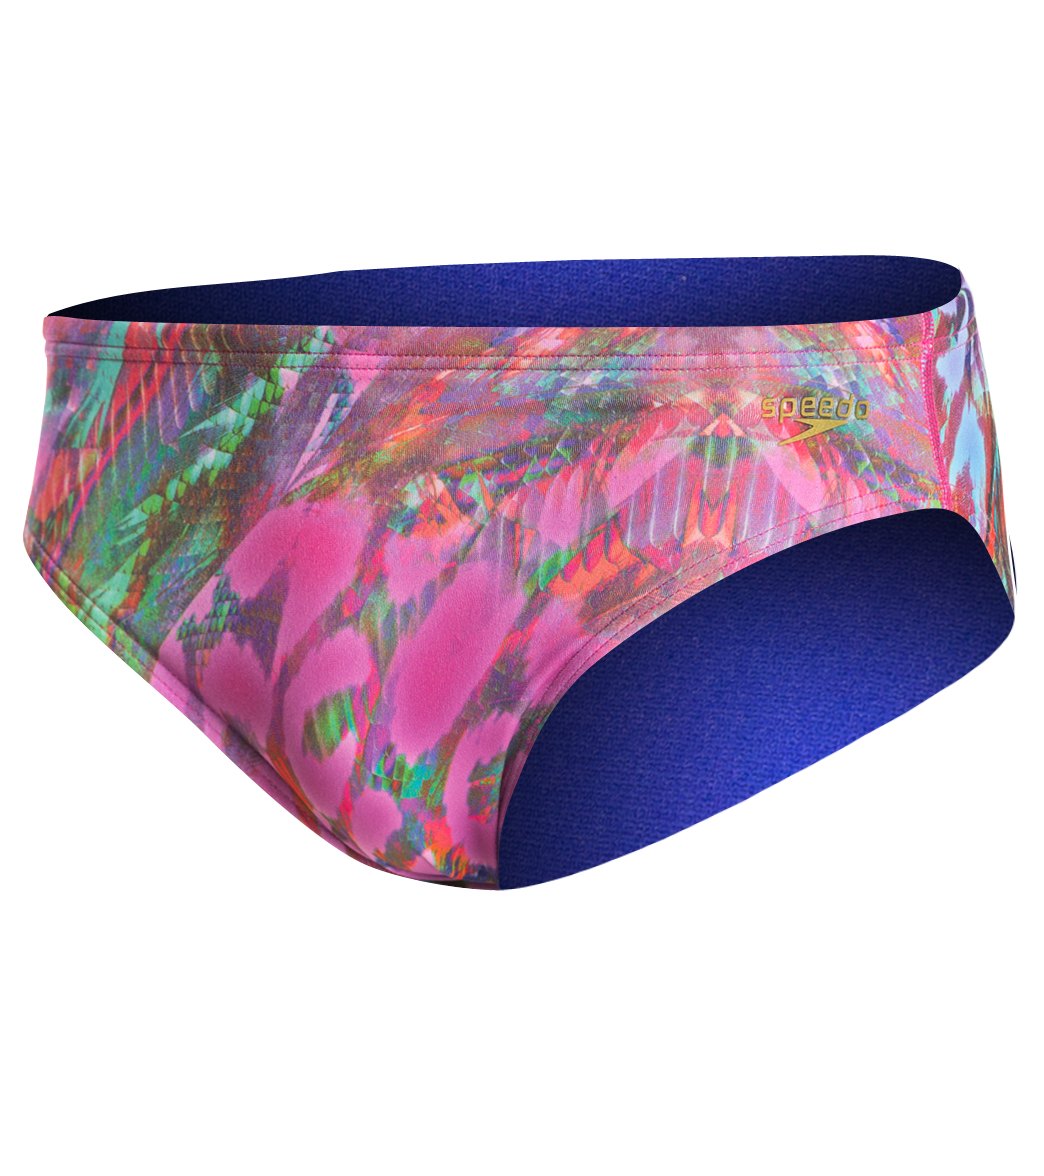 Speedo Rainbow Wings Printed Brief Swimsuit at SwimOutlet.com